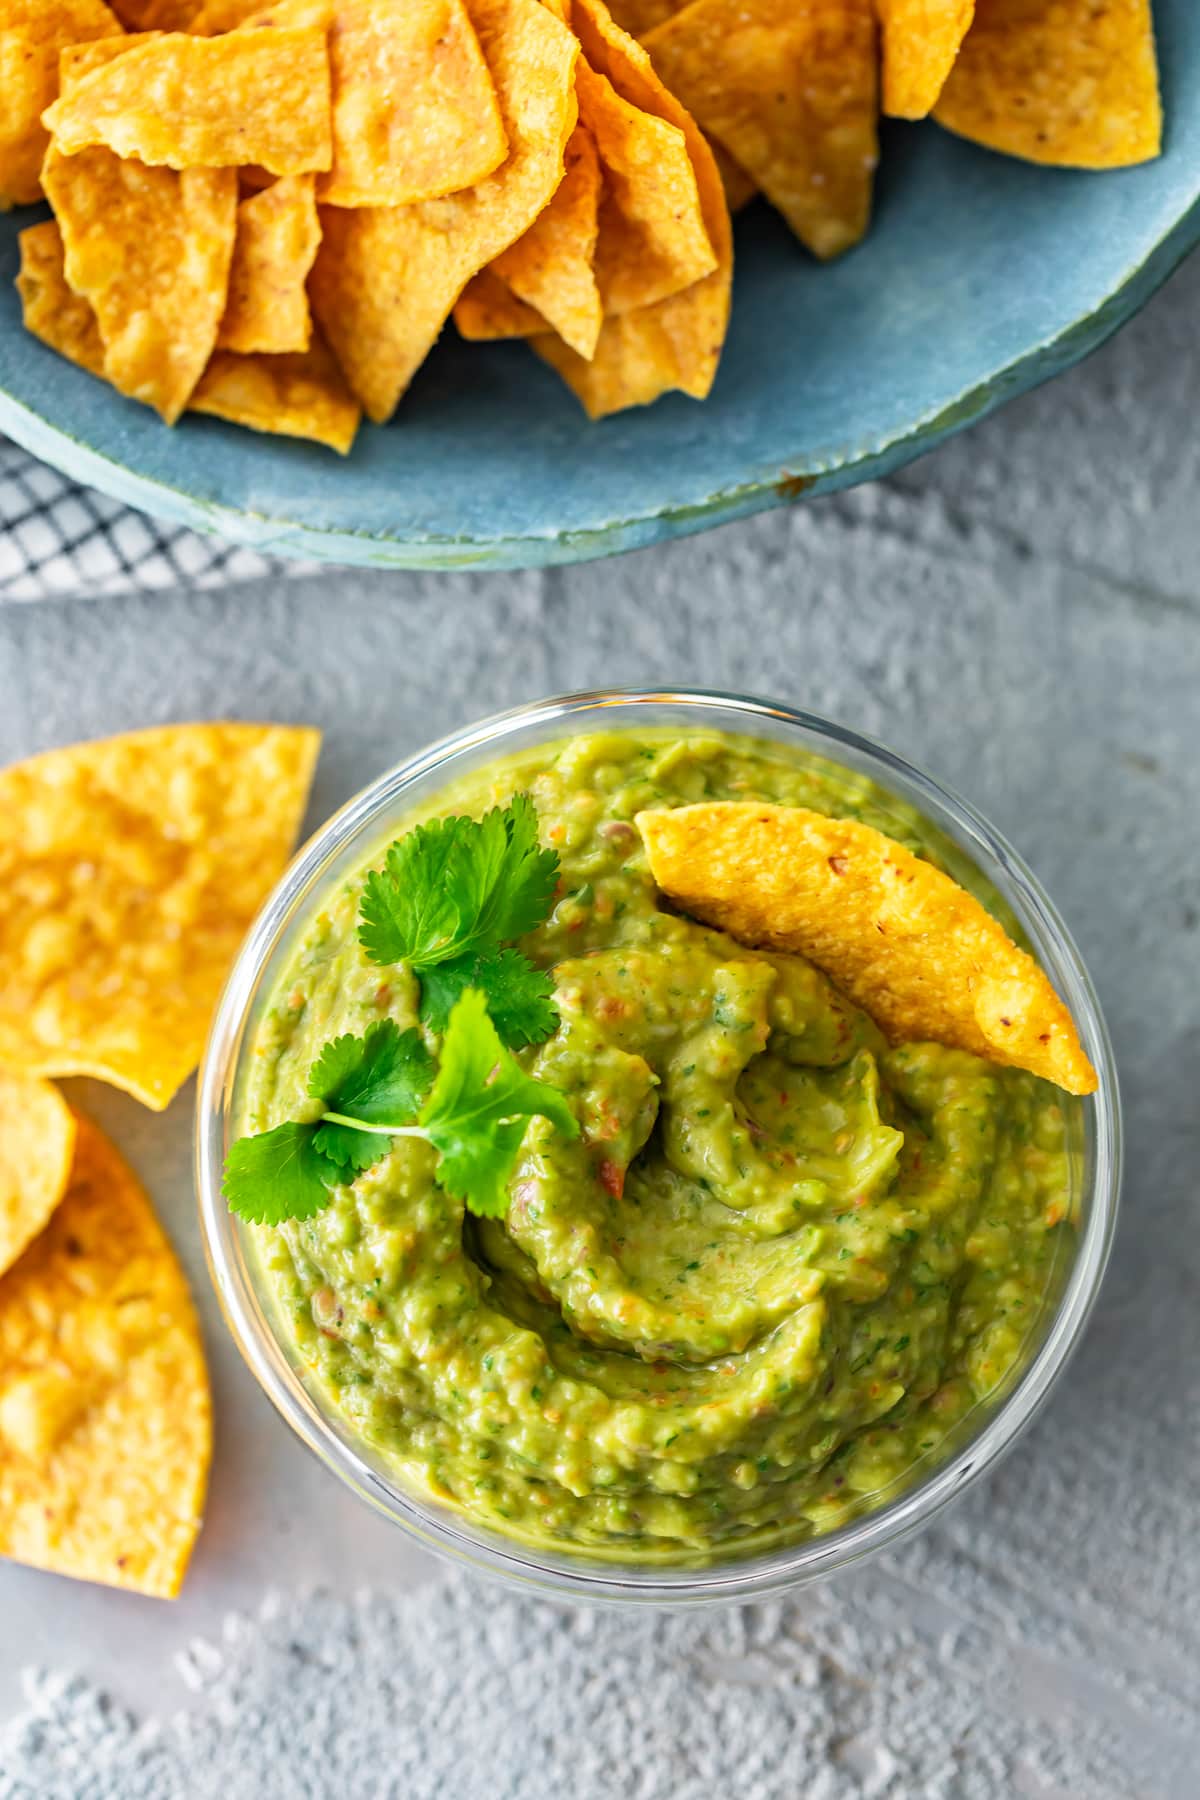 a bowl of guacamole next to a bowl of chips